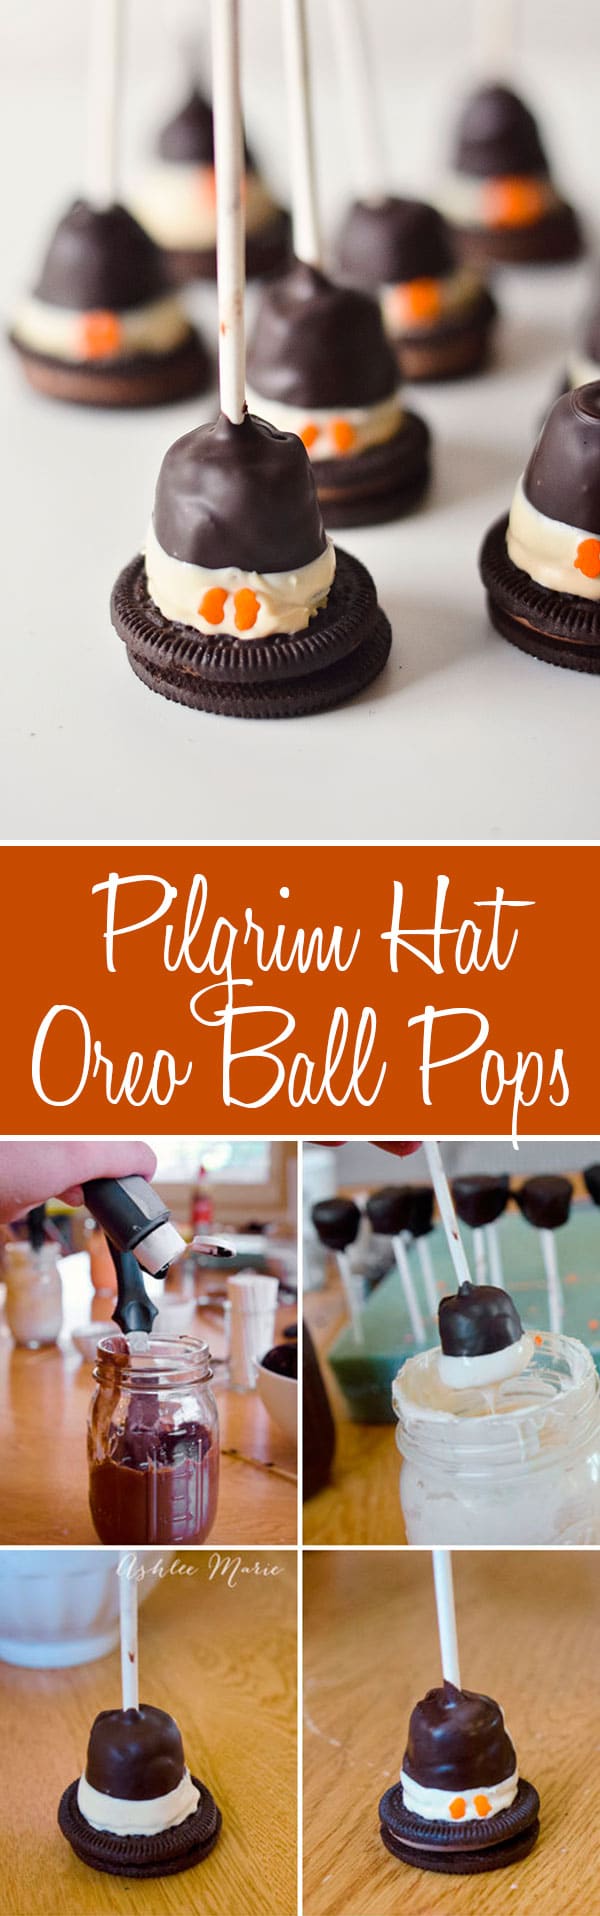 a tutorial for Pilgrim hat shaped OREO cookie ball pops